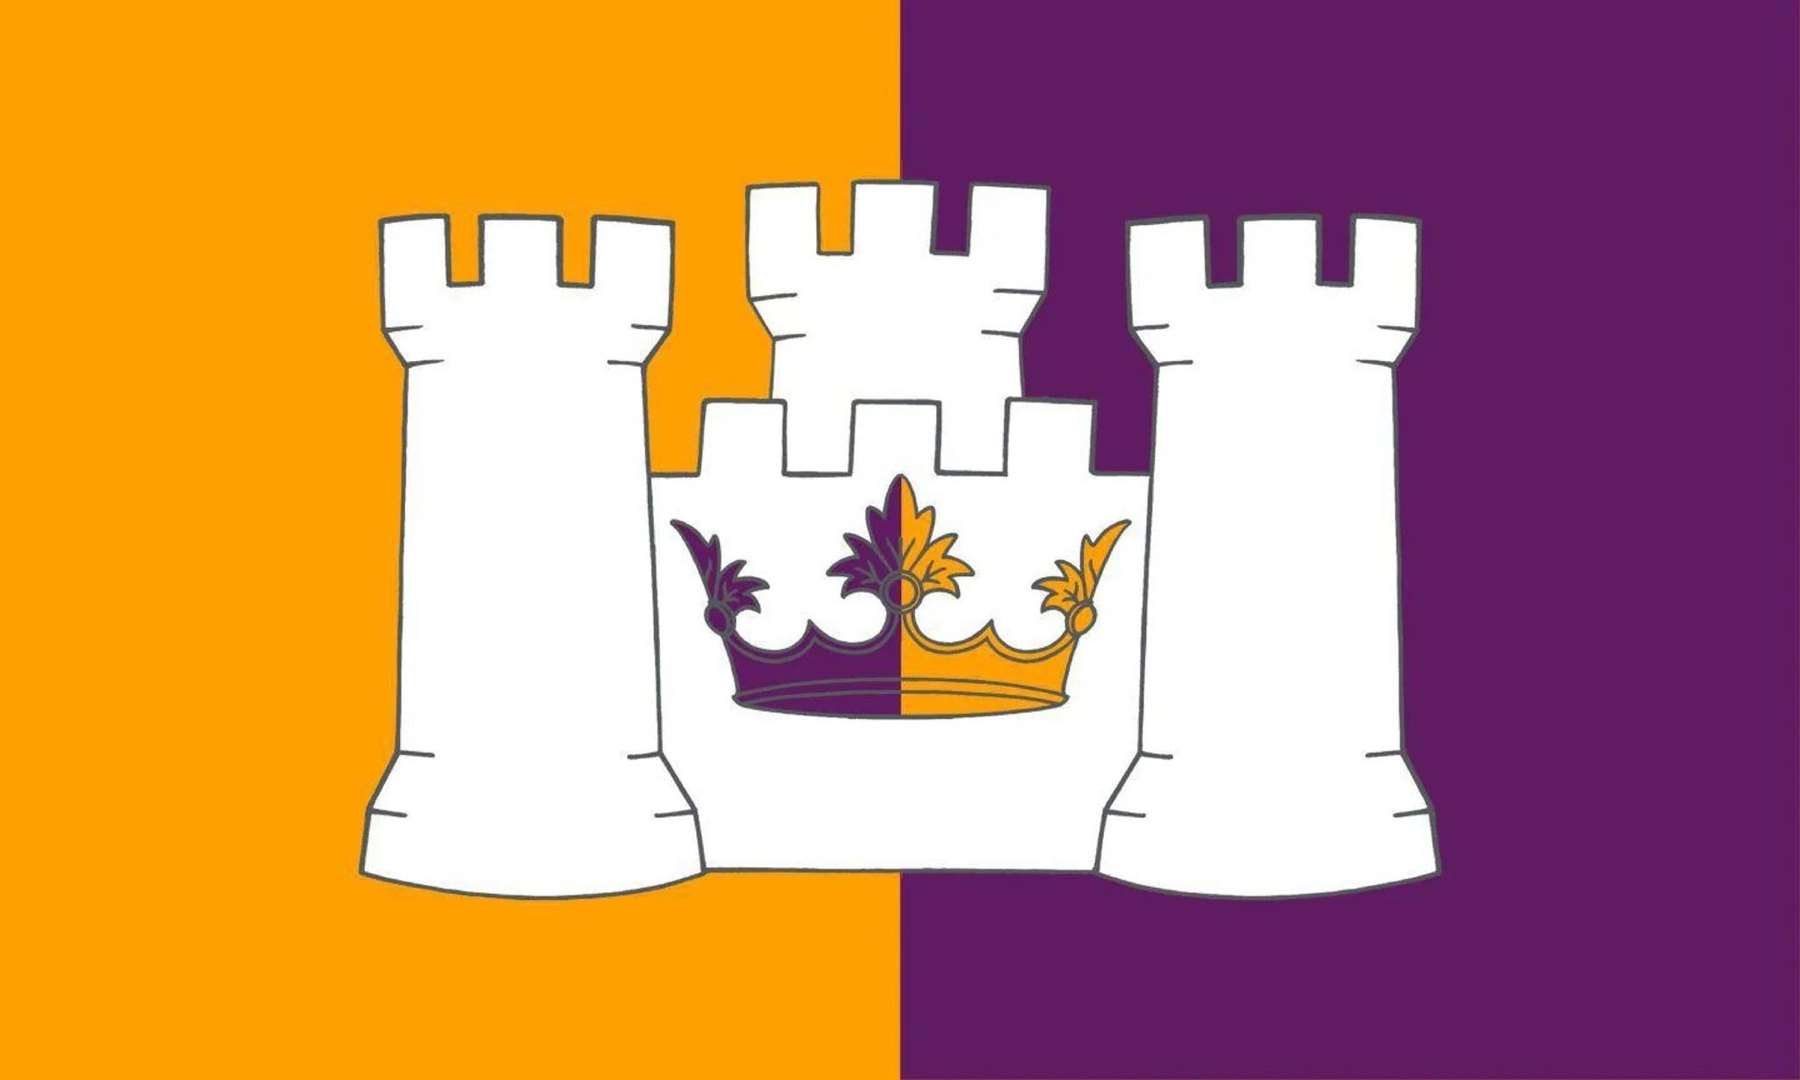 The new Aberdeenshire County flag